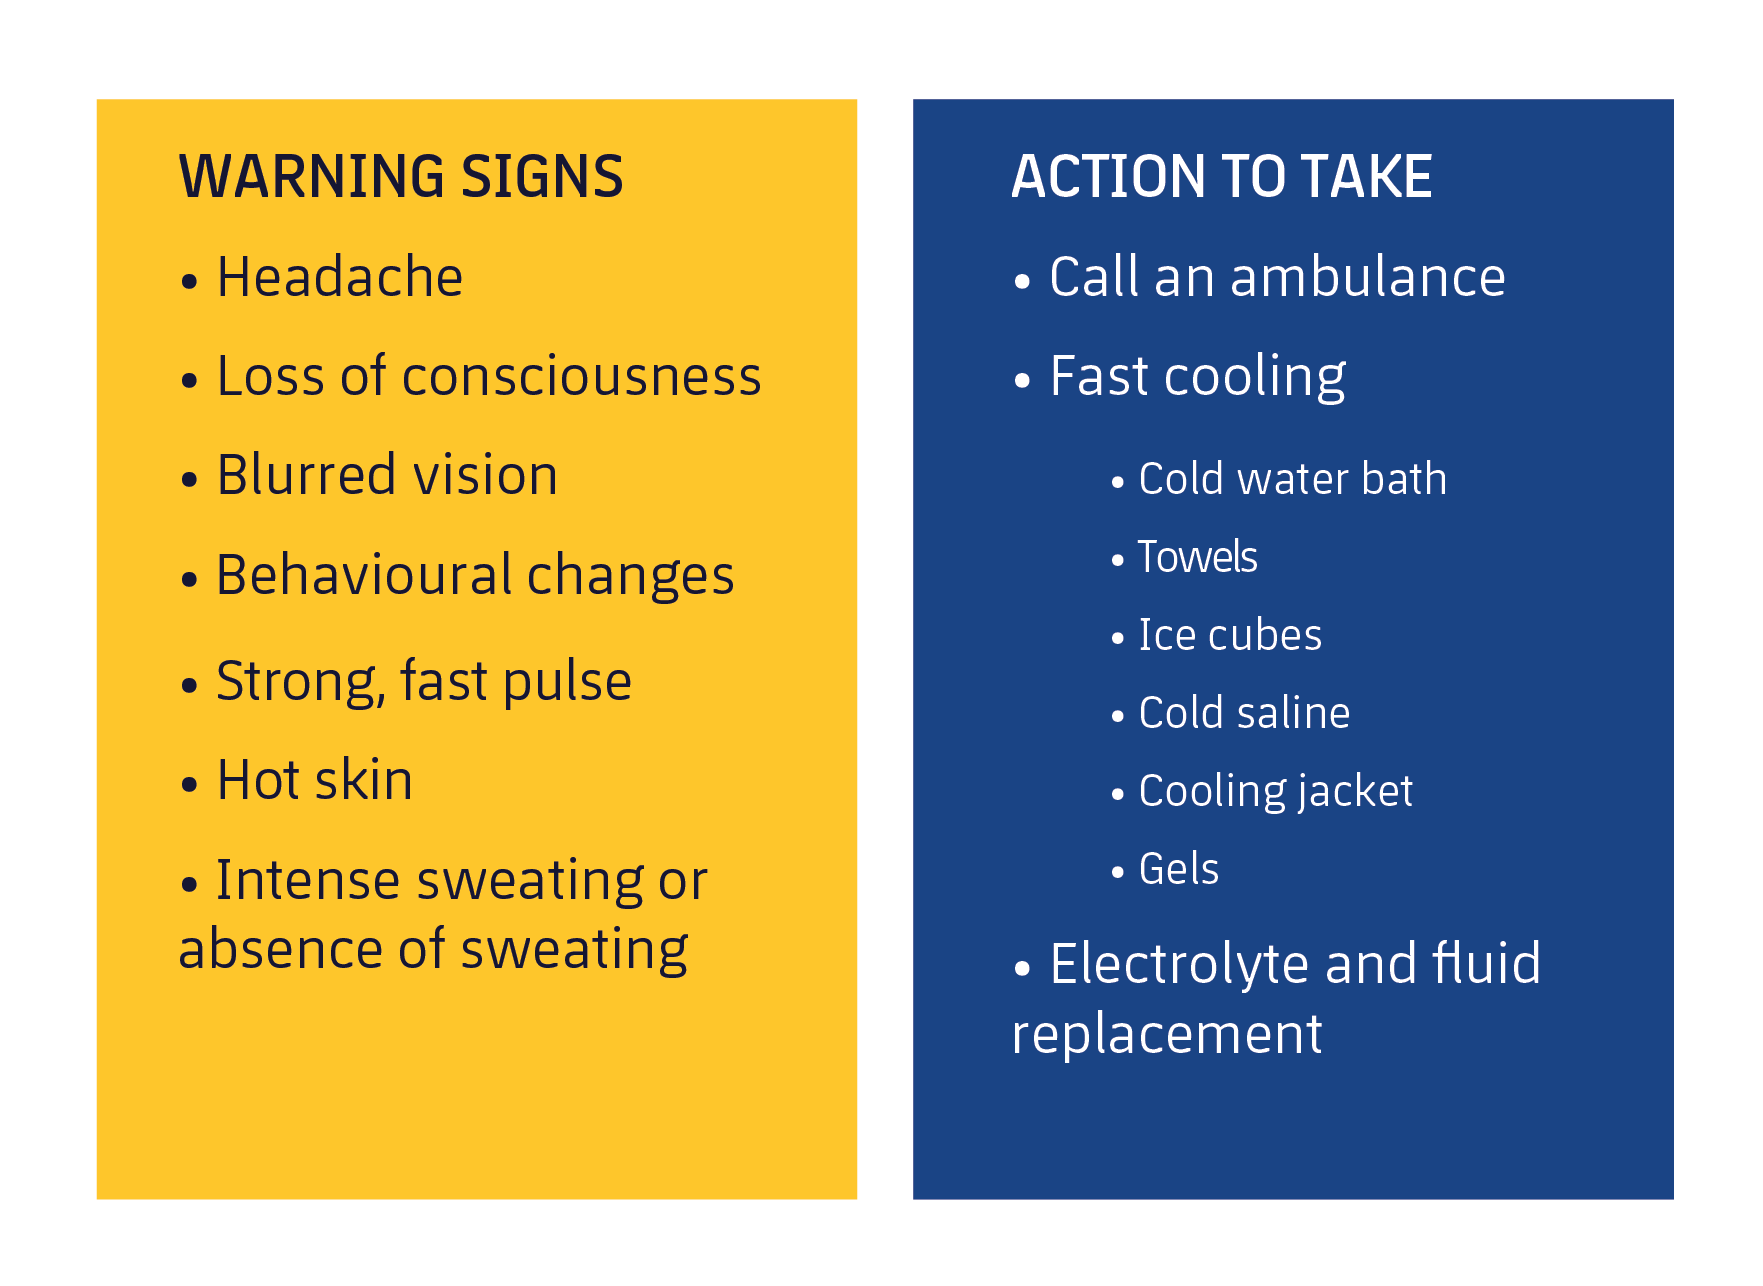 Figure 4. Warning signs and steps to take in a situation of exhaustion and heat stroke. Material obtained from Dr Franchek Drobnic.